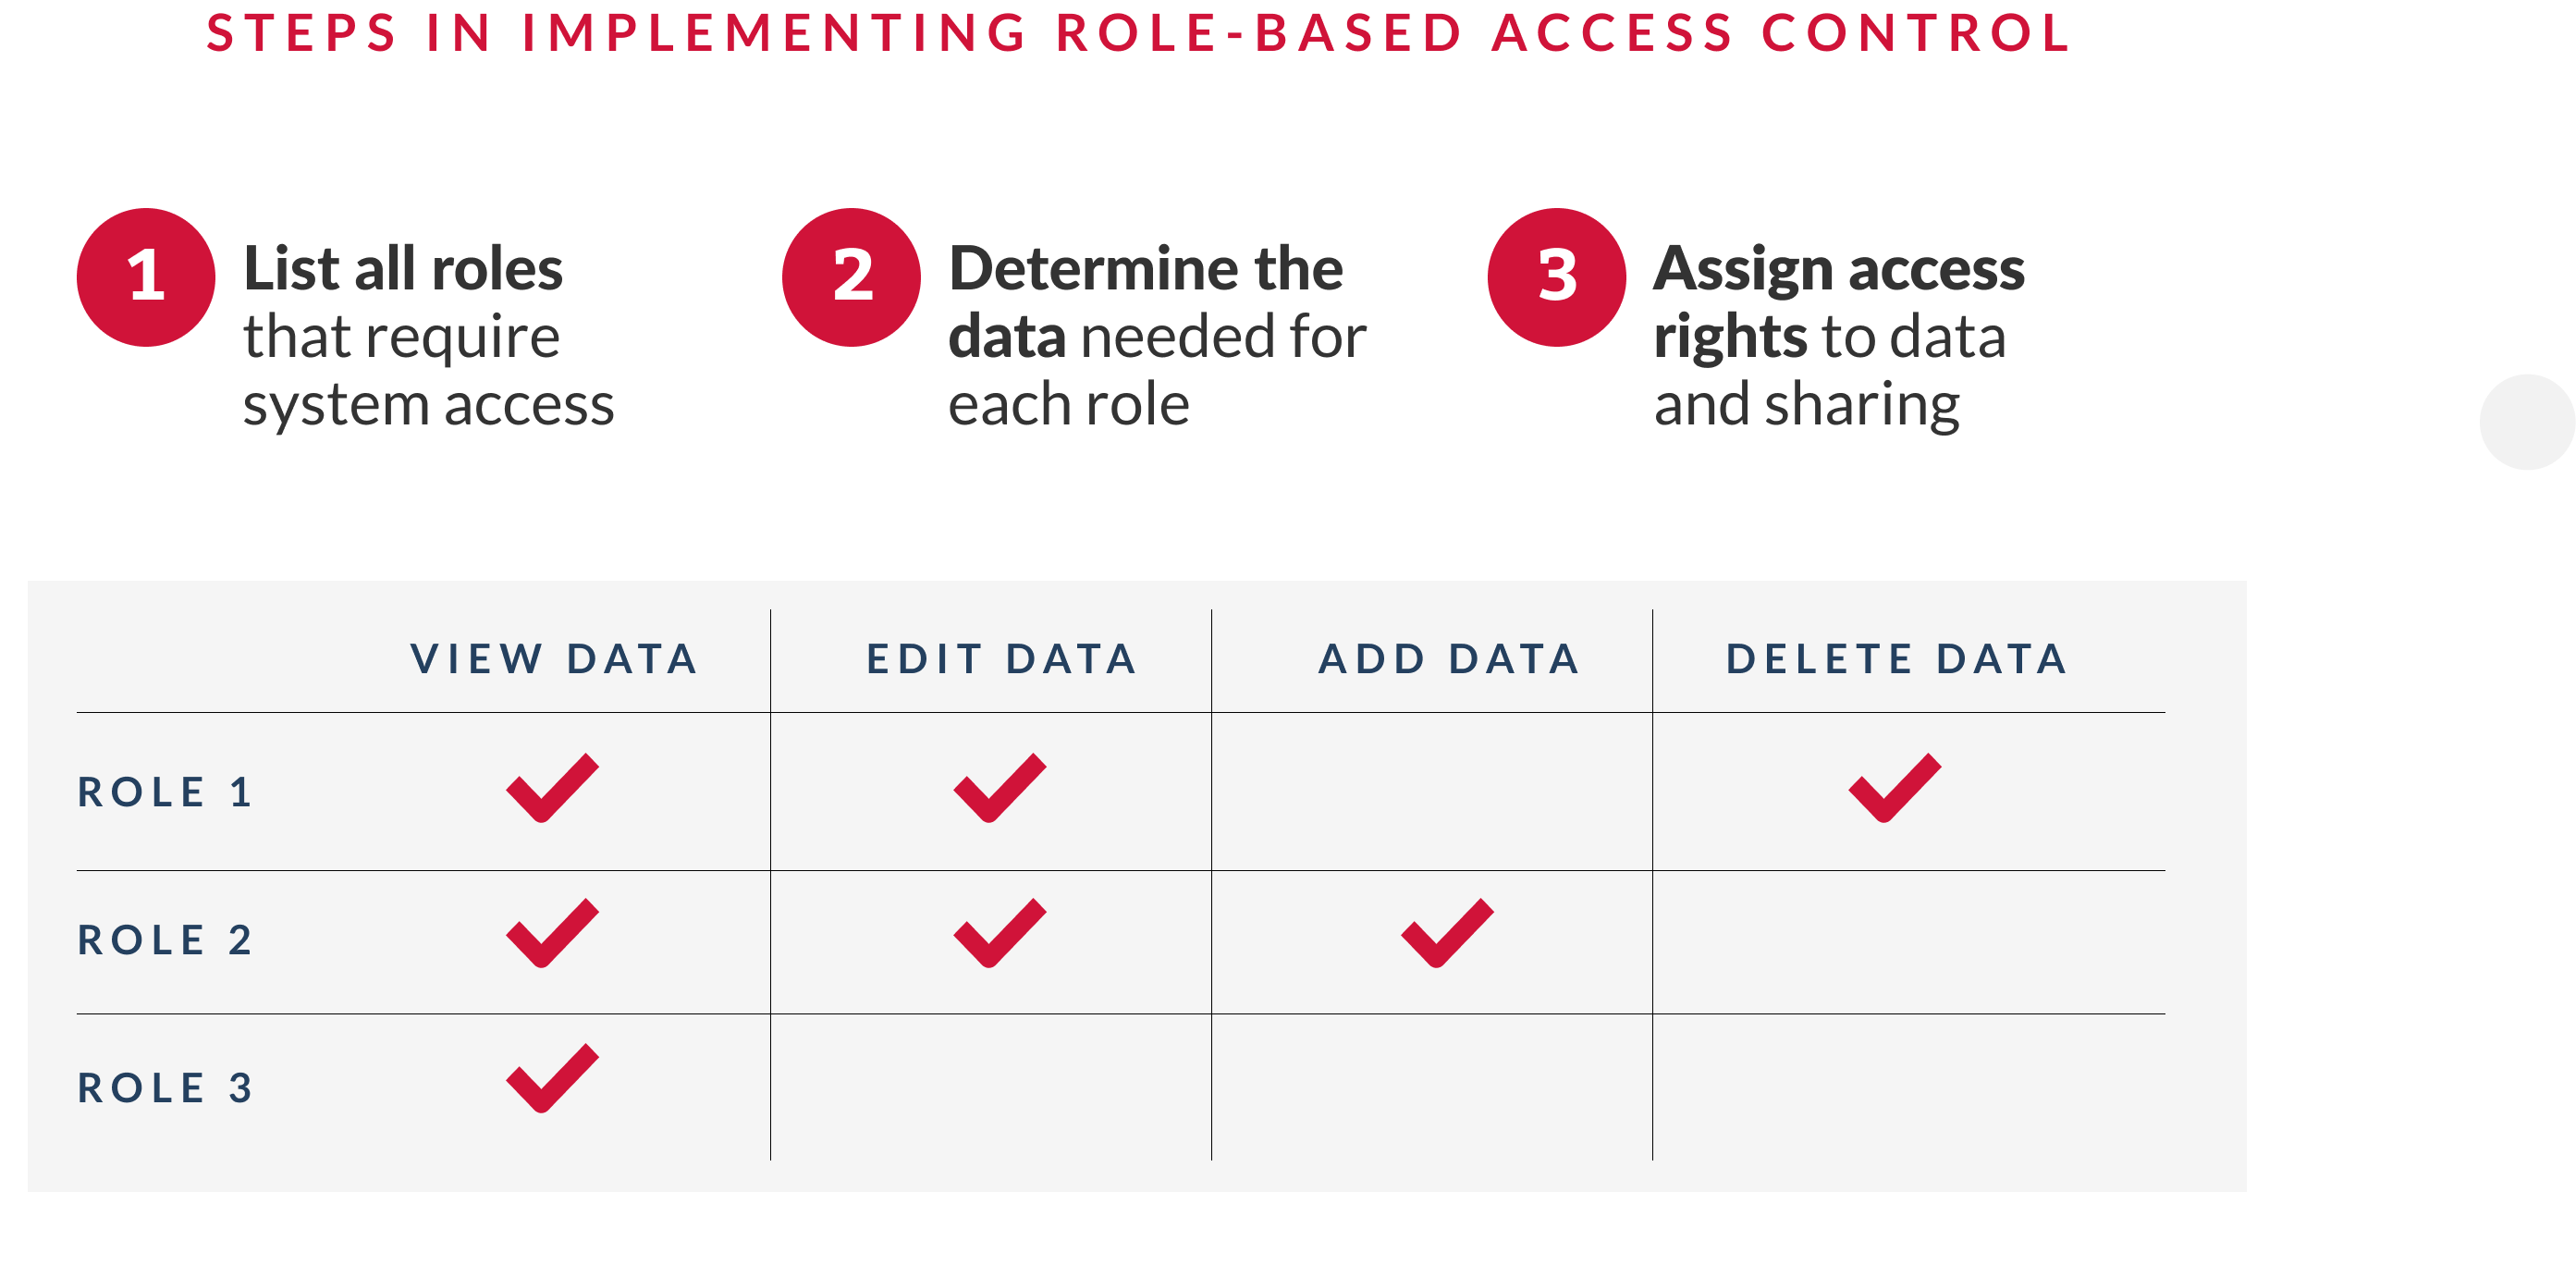 Steps in Implementing Role-Based Access Control